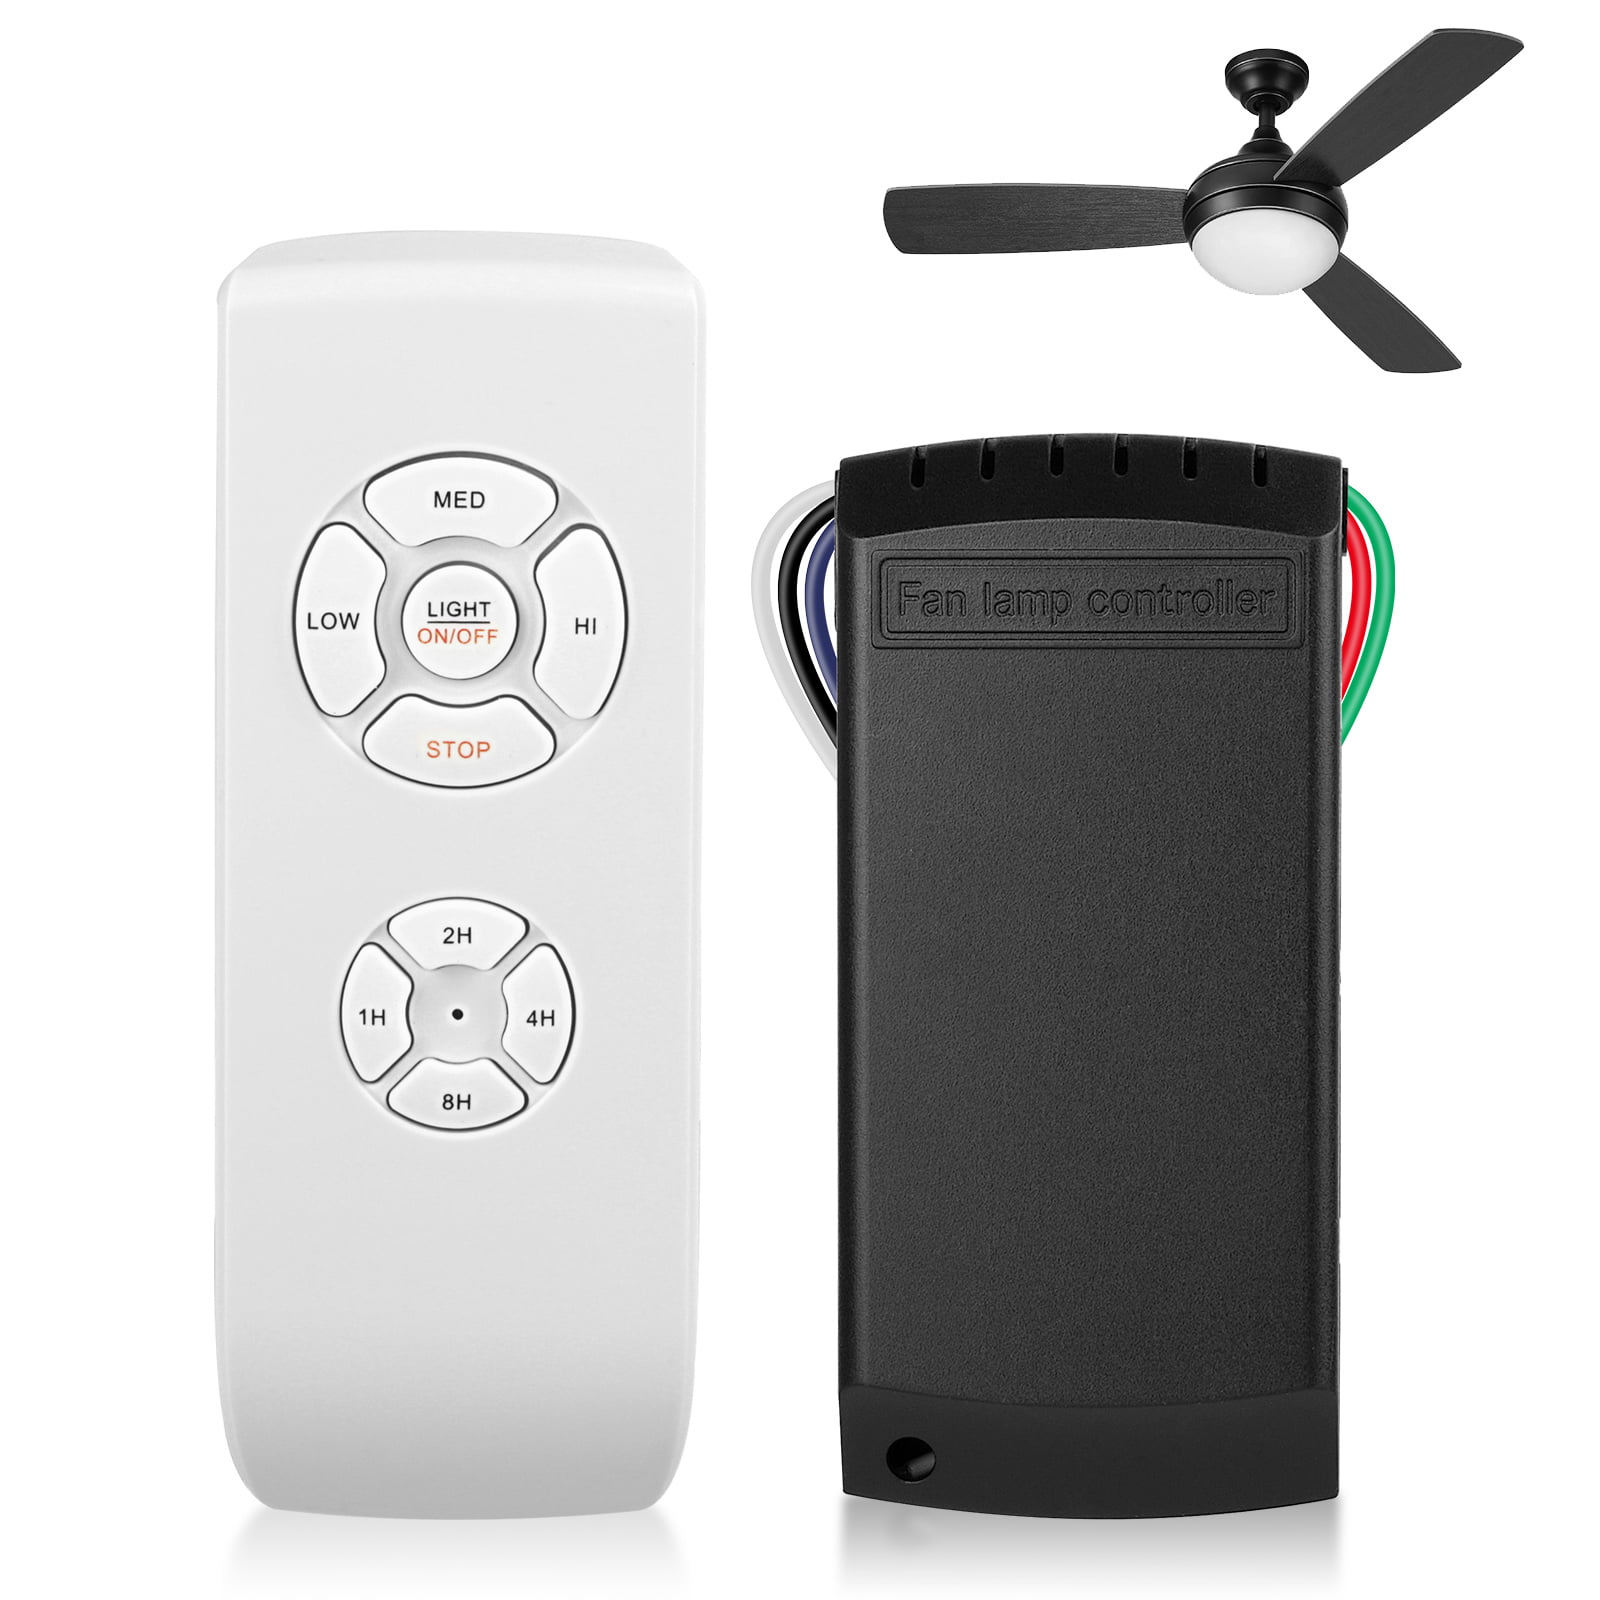 110-120V Universal Wireless Remote Control Kit for Ceiling Fan Lamp Timing